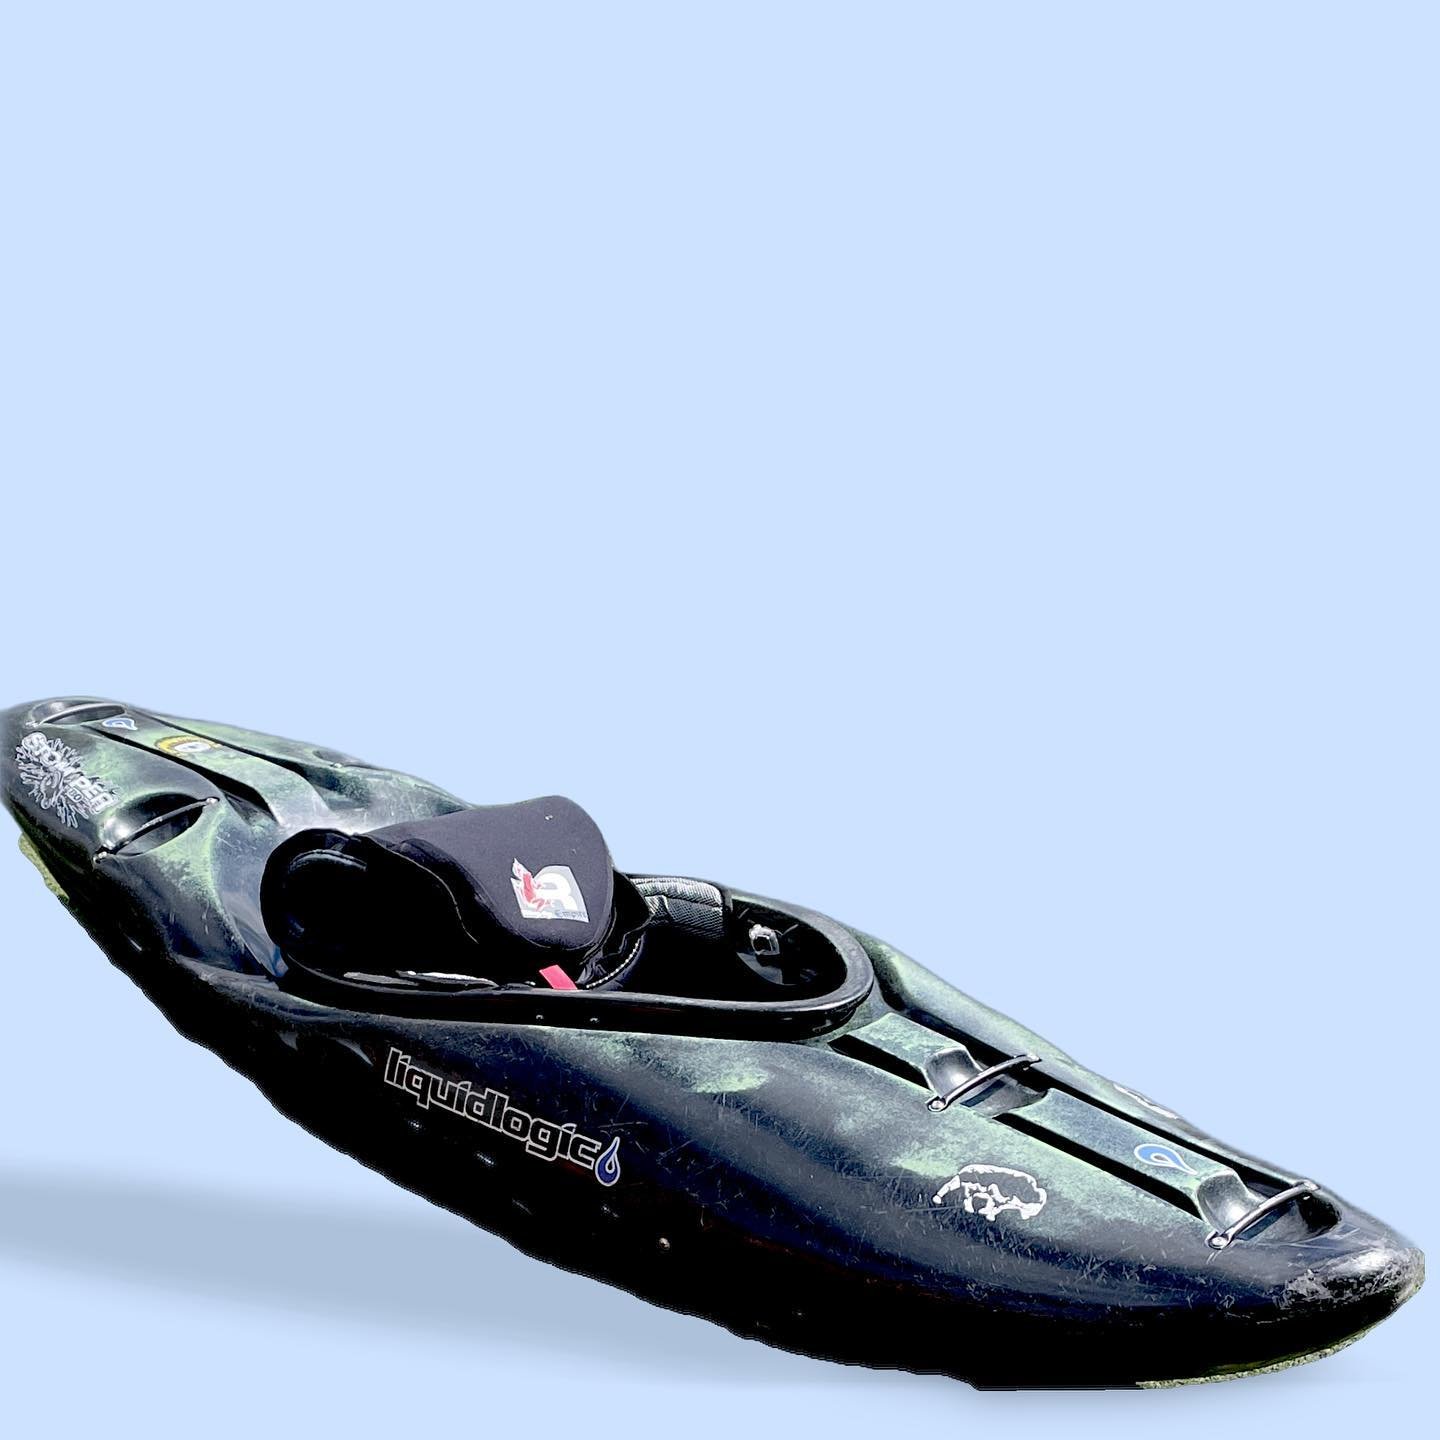 Feeling whitewater curious but don&rsquo;t know where to start? This Liquid Logic Stomper 80 is a highly stable whitewater kayak ideal for paddlers between 140-200lbs who are looking to get out on the Wenatchee this summer! 

Includes like new IR Kli